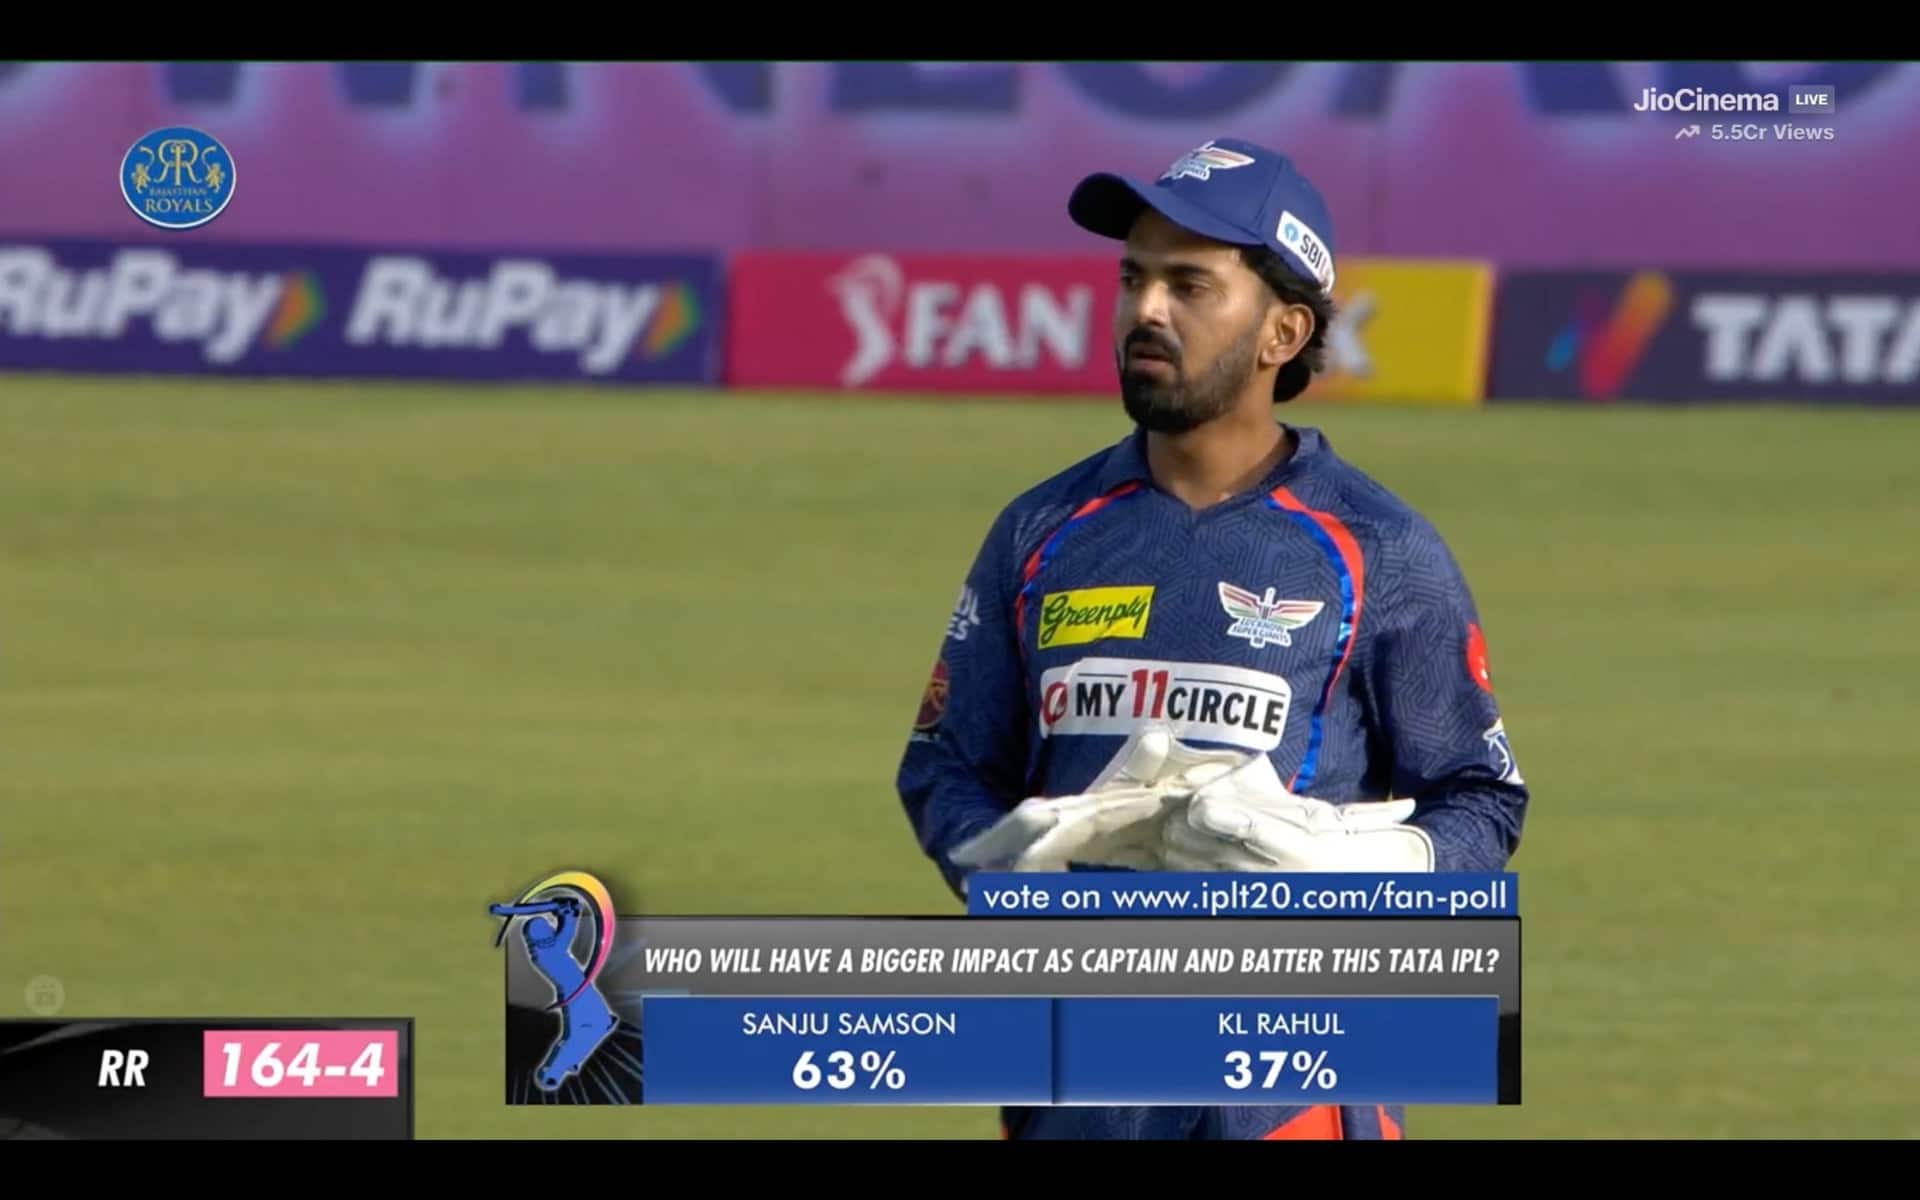 Sanju Samson is likely to have a bigger impact in IPL (Source: X.com)